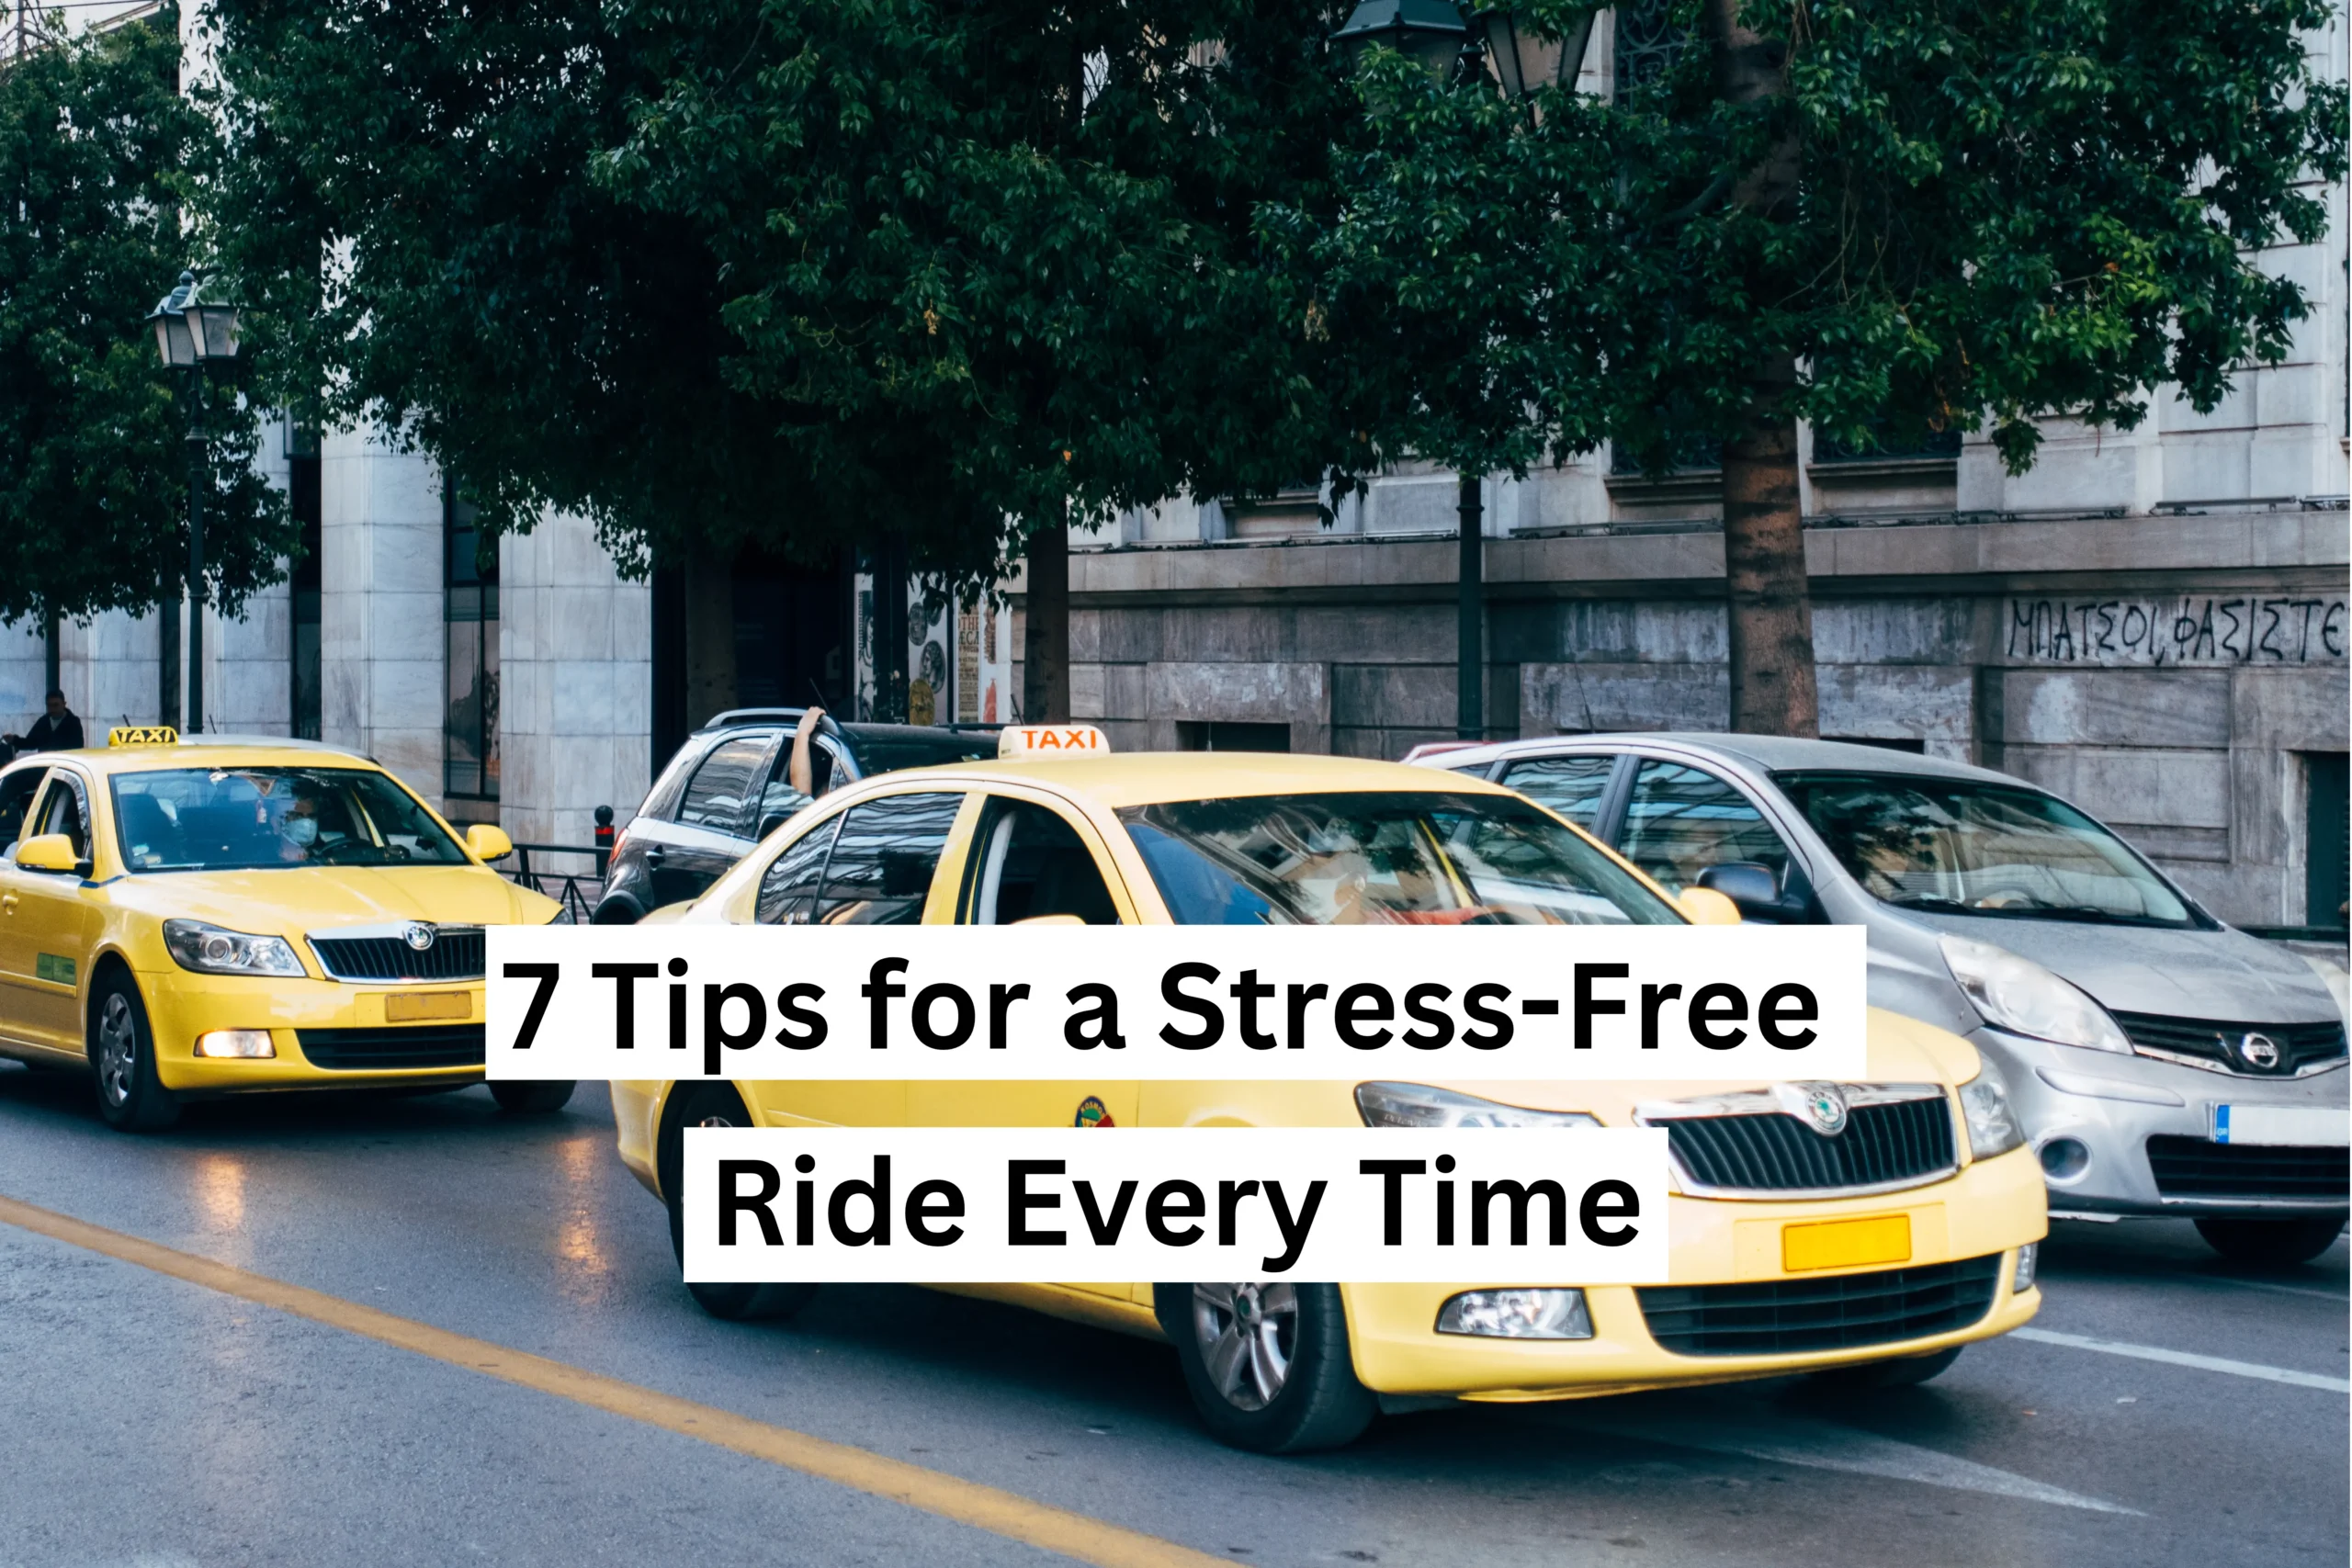 Huntingdon Taxi Service: 7 Tips for a Stress-Free Ride Every Time